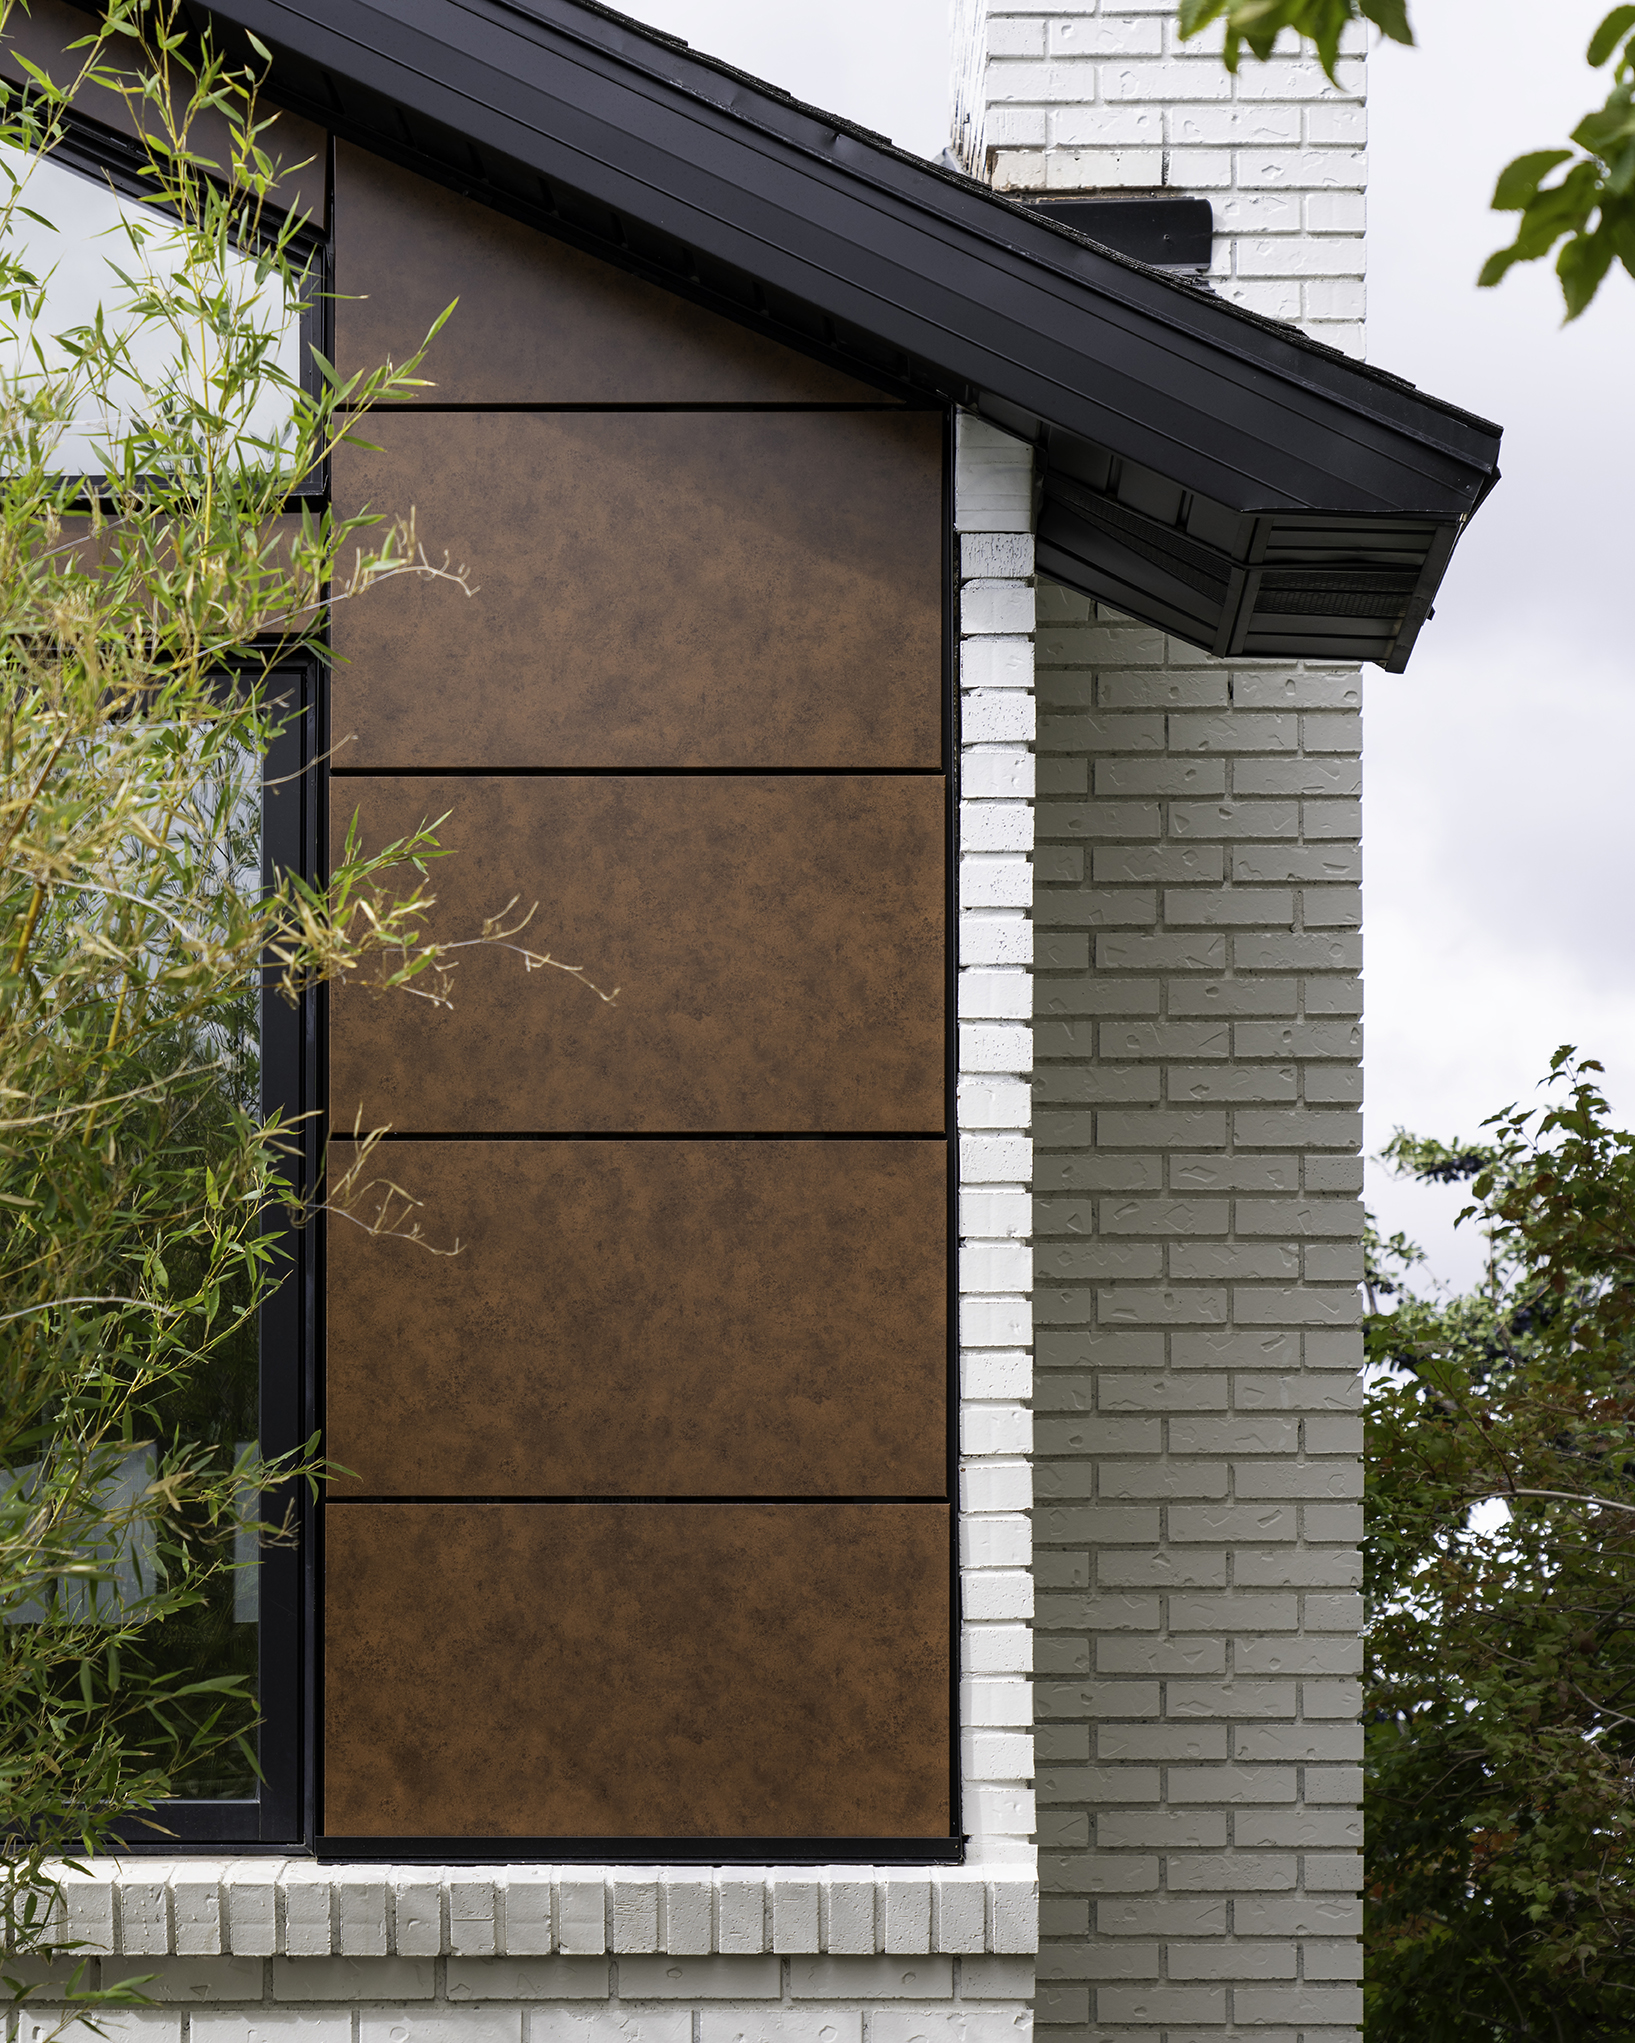 Rusted Metal, ALUCOBOND PLUS, ALUCOBOND EasyFix, Product Photography, Salt Lake City, UT, Aluminum Composite Material, Exterior Home Remodel